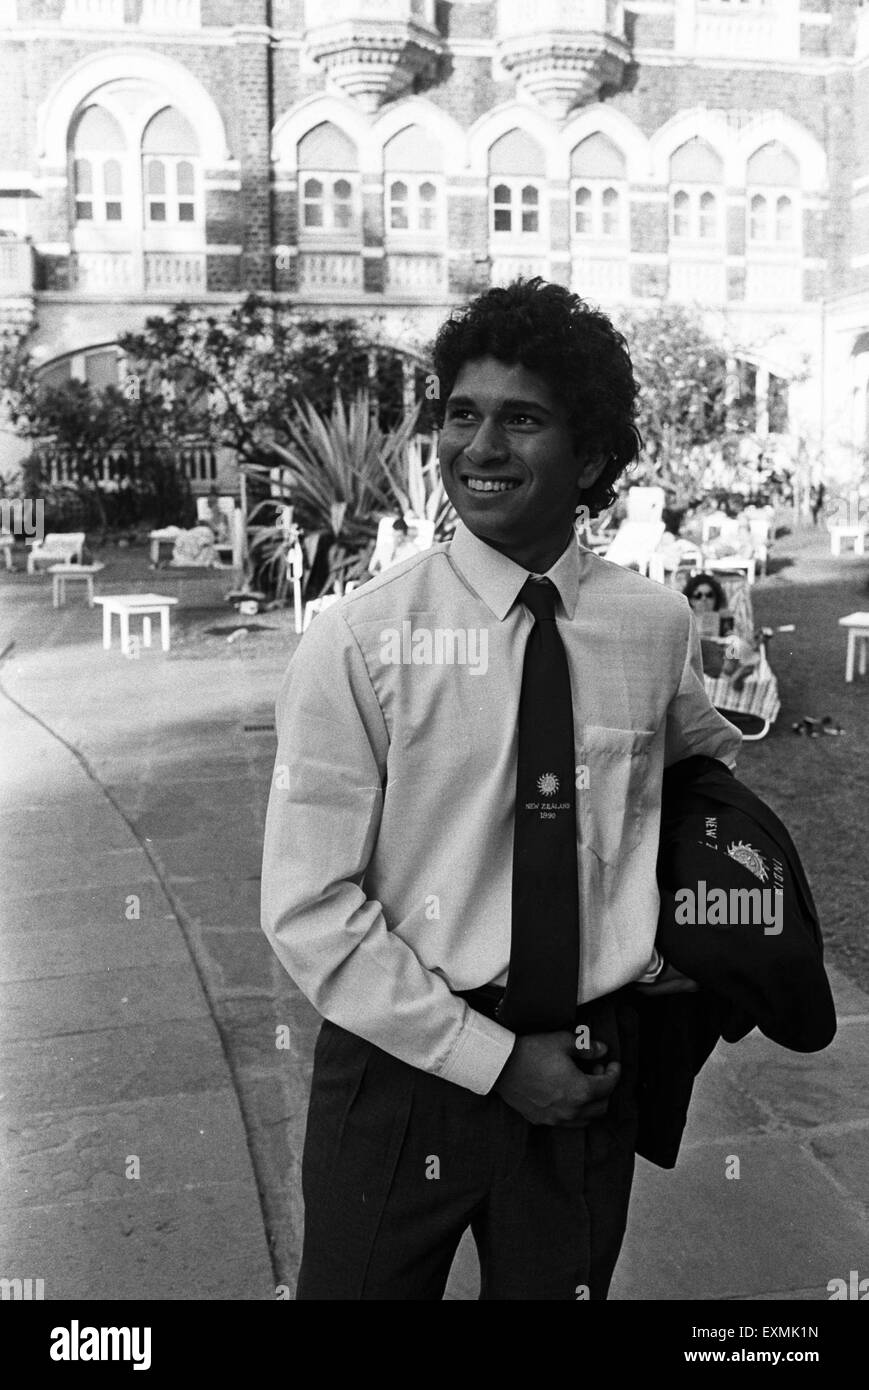 Sachin Tendulkar, Indian cricketer, Sachin Ramesh Tendulkar, Indian former international cricketer, captain of the Indian national team, one of the greatest batsmen in the history of cricket, Bombay, Mumbai, Maharashtra, India, Asia, old vintage 1900s picture Stock Photo